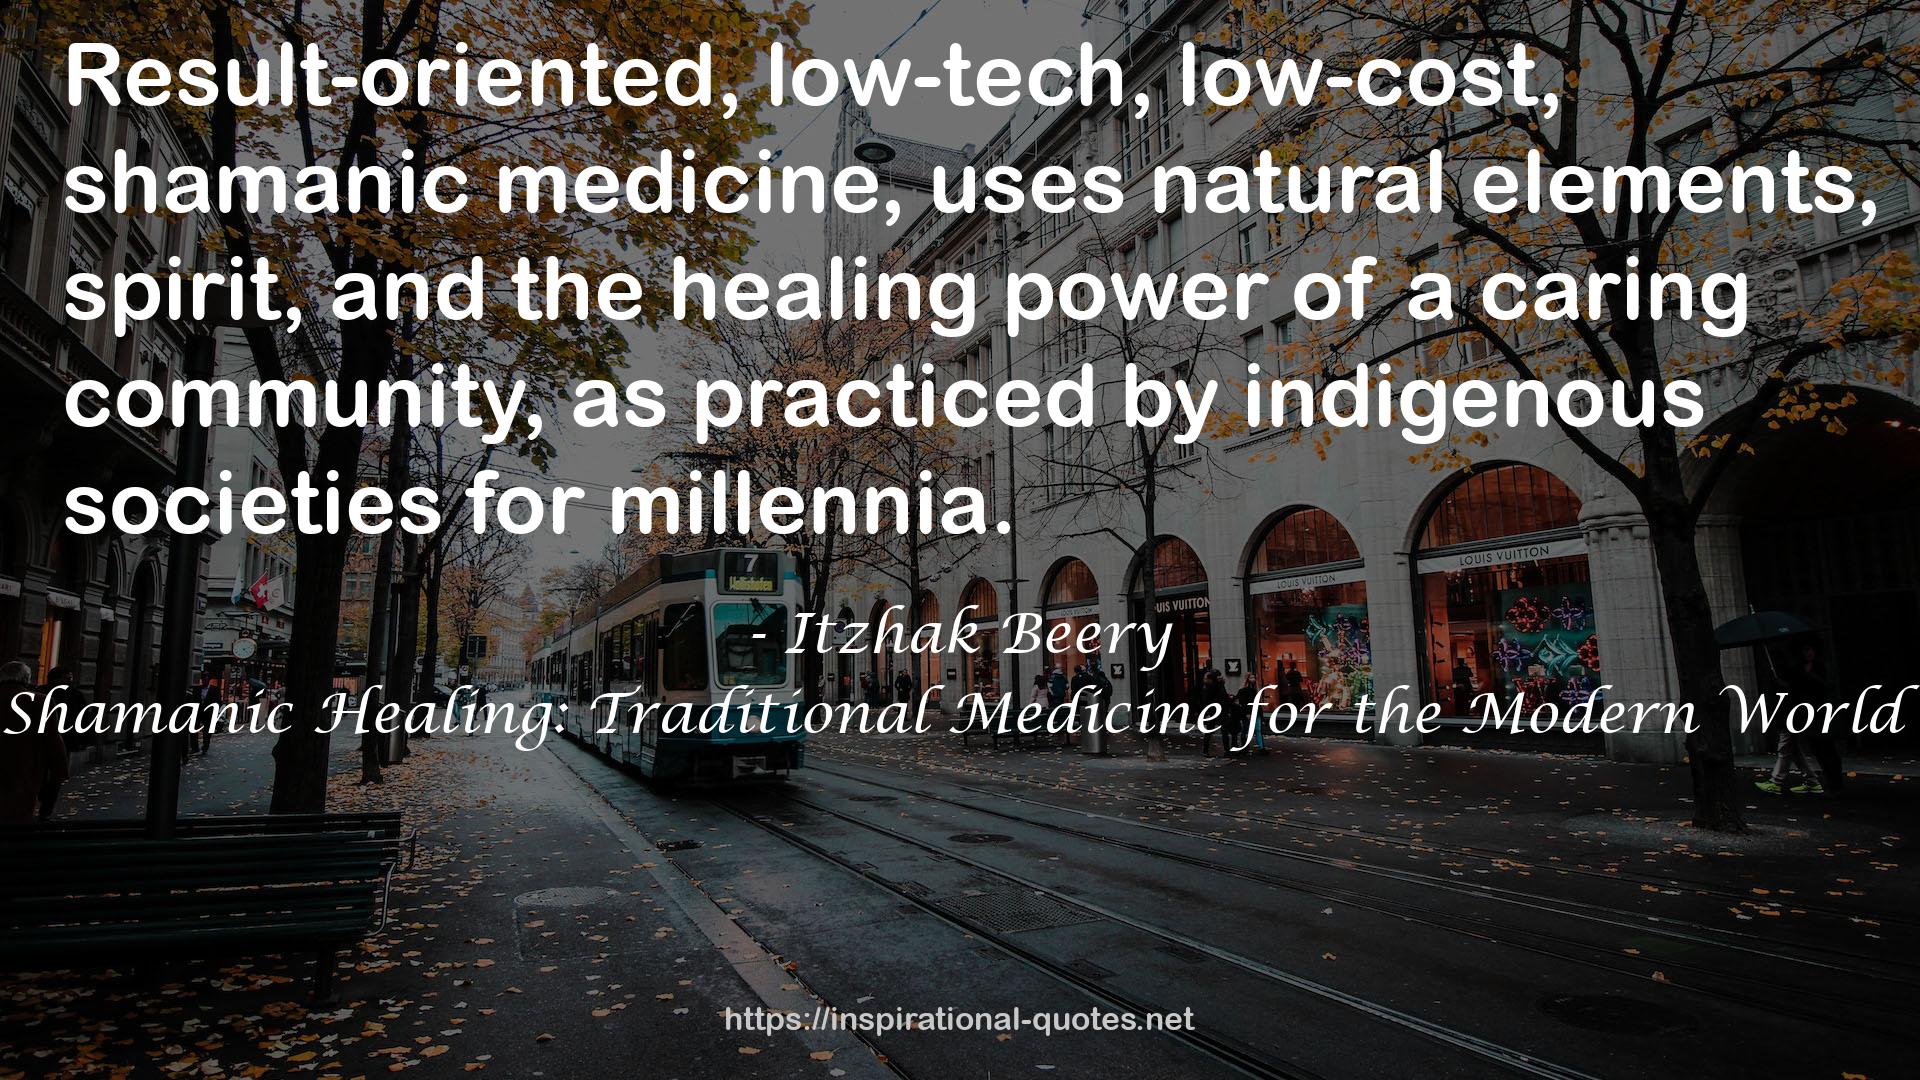 Shamanic Healing: Traditional Medicine for the Modern World QUOTES